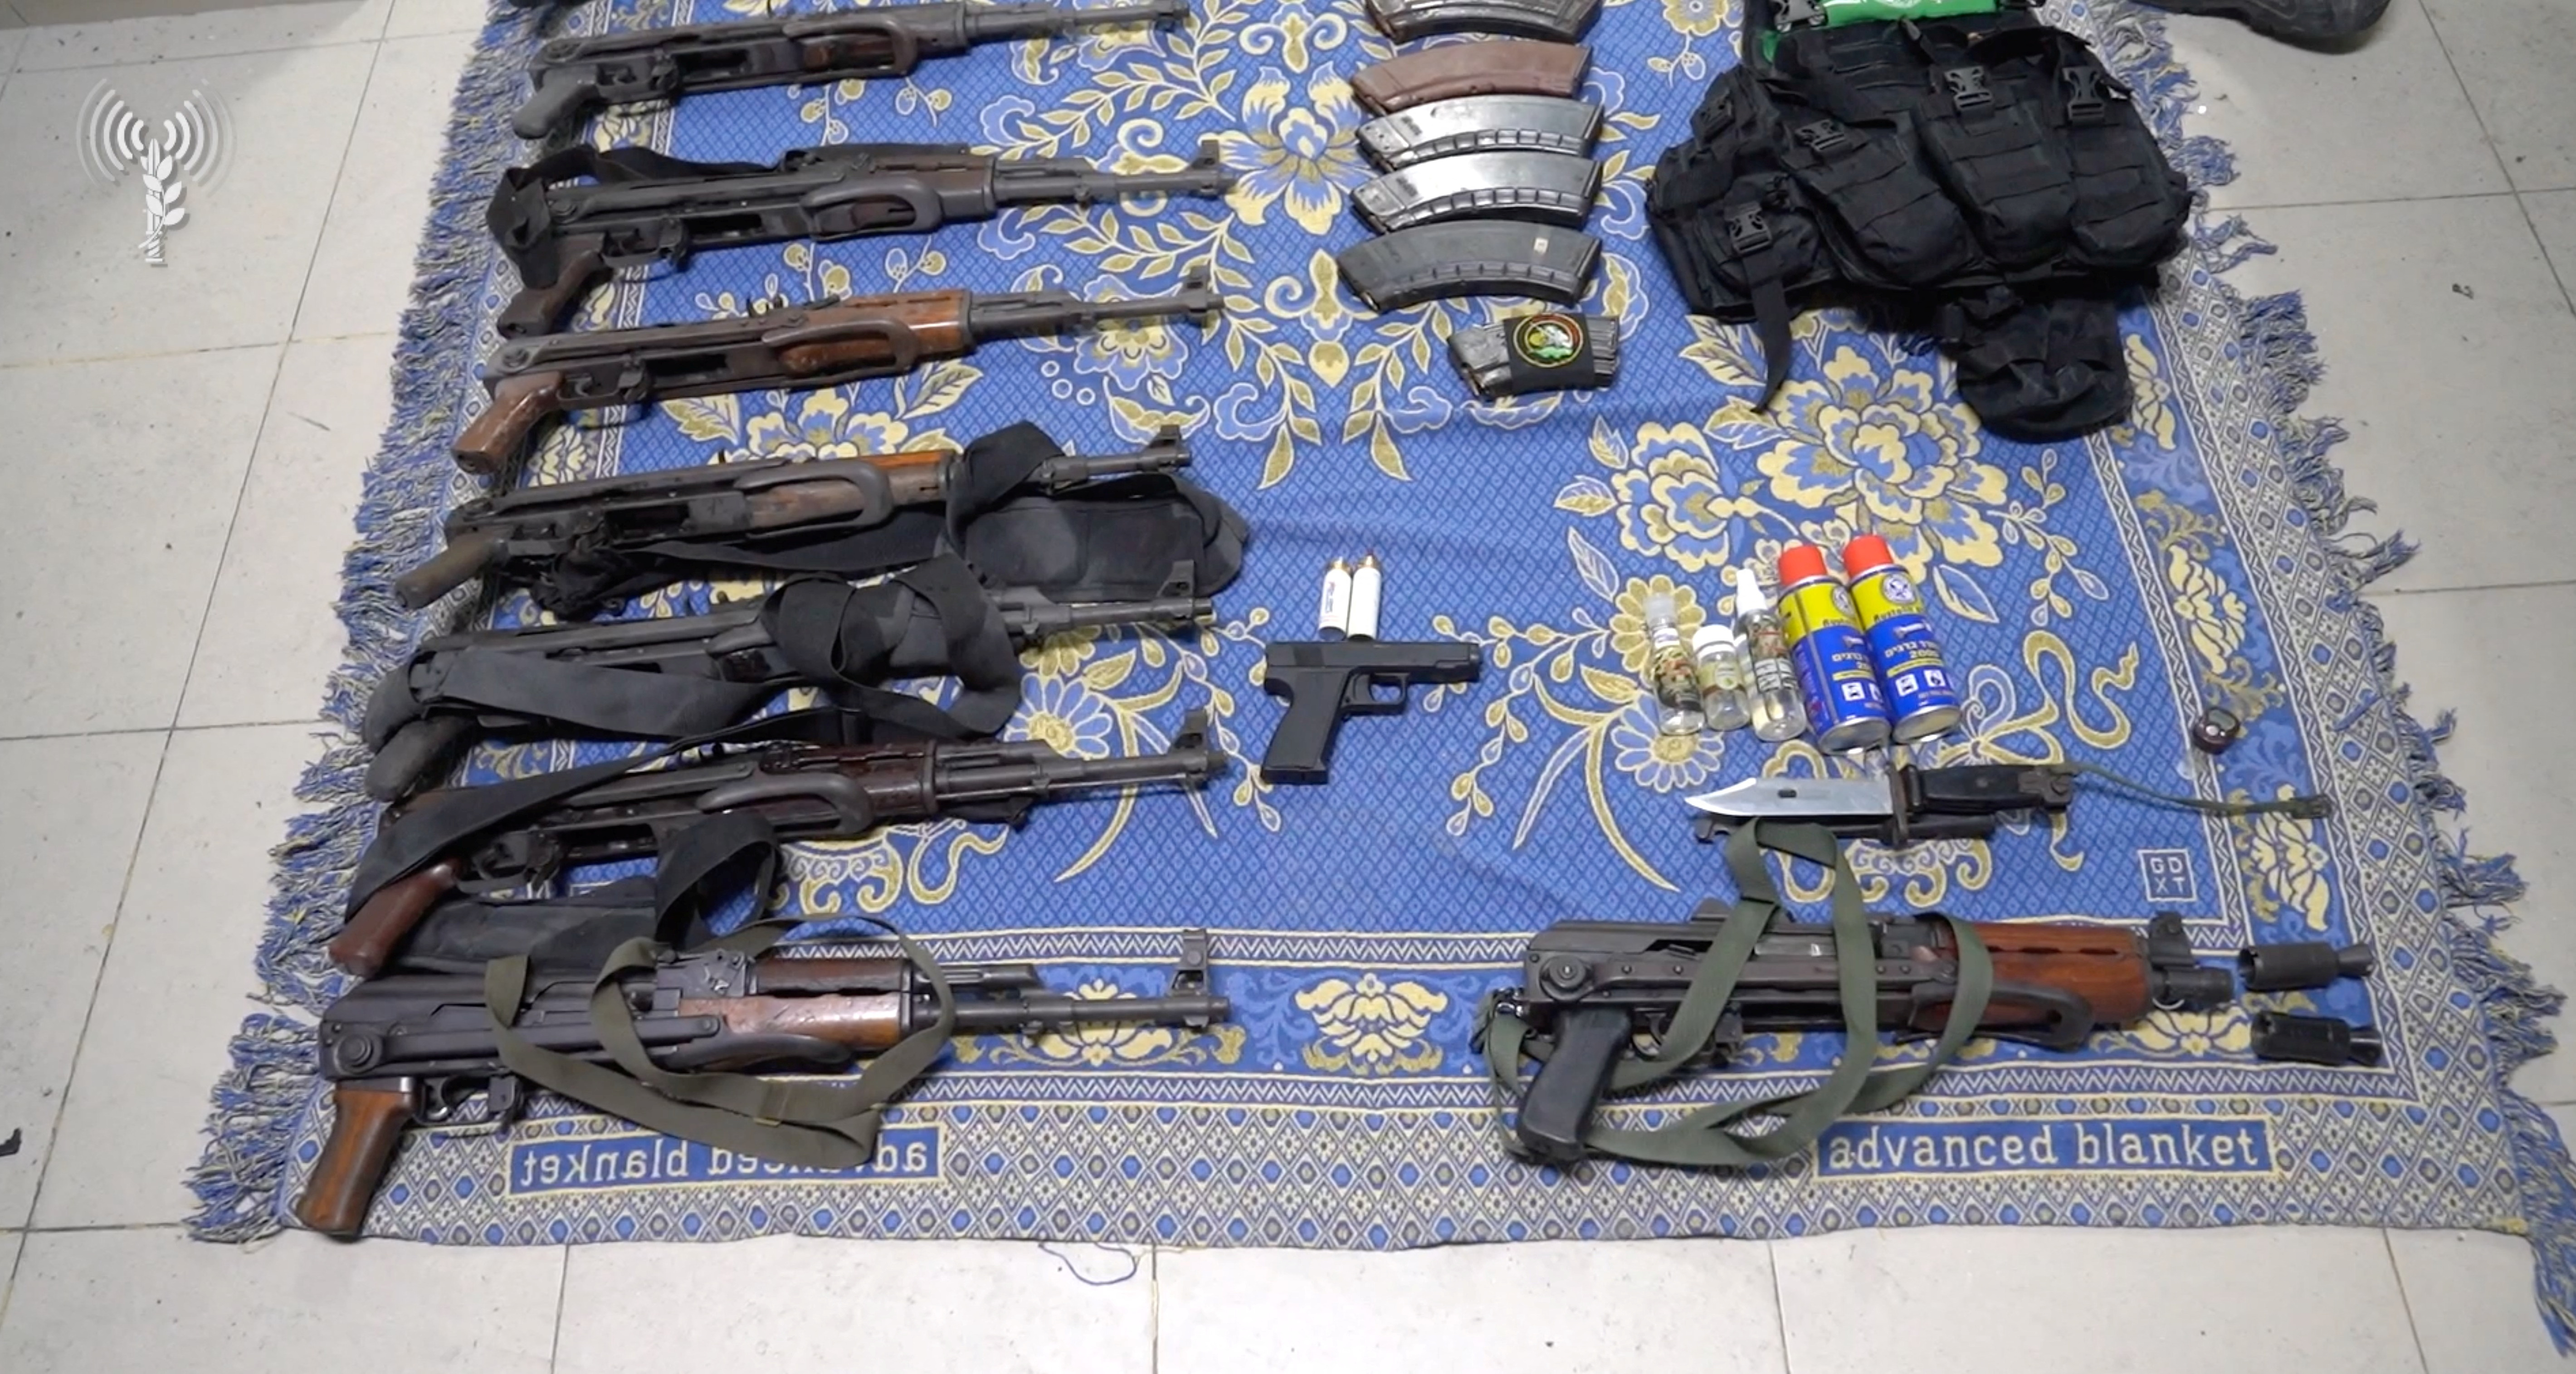 Israel Defense Forces has released pictures of what it says are weapons and equipment found at Al Shifa hospital complex in the Gaza Strip./Israeli Defense Forces.